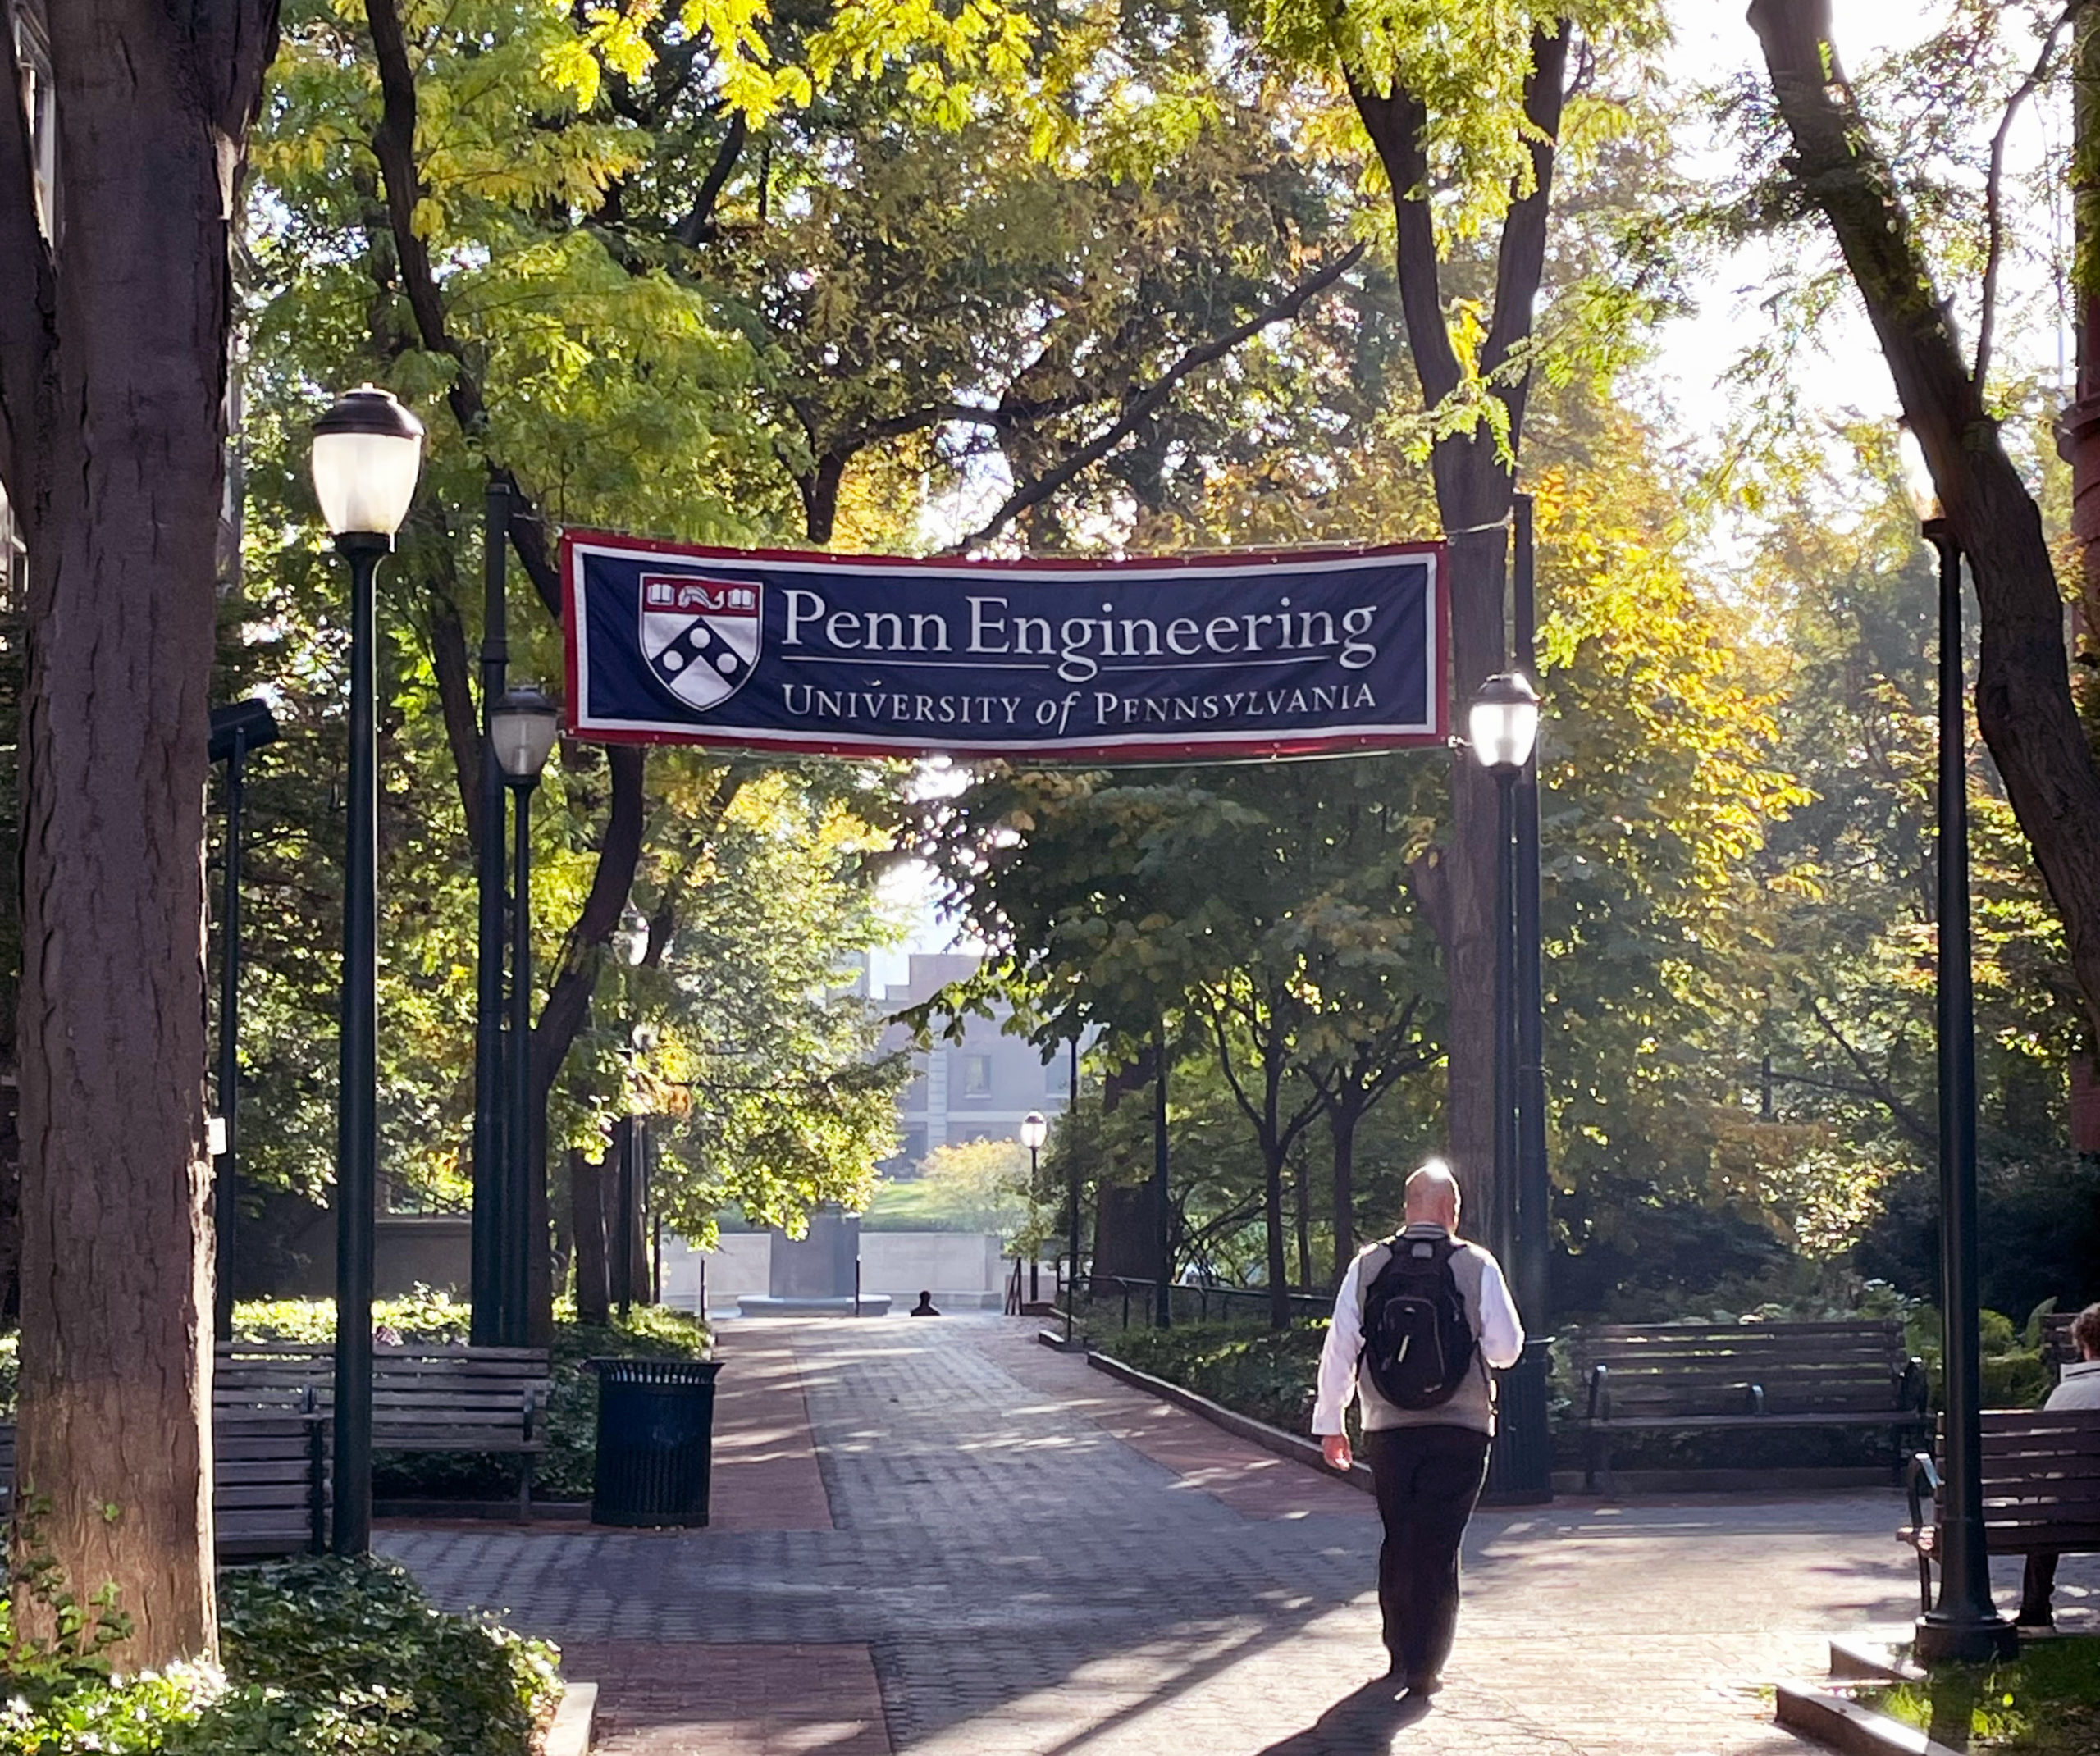 Banner over Smith Walk on Penn Engineering campus.